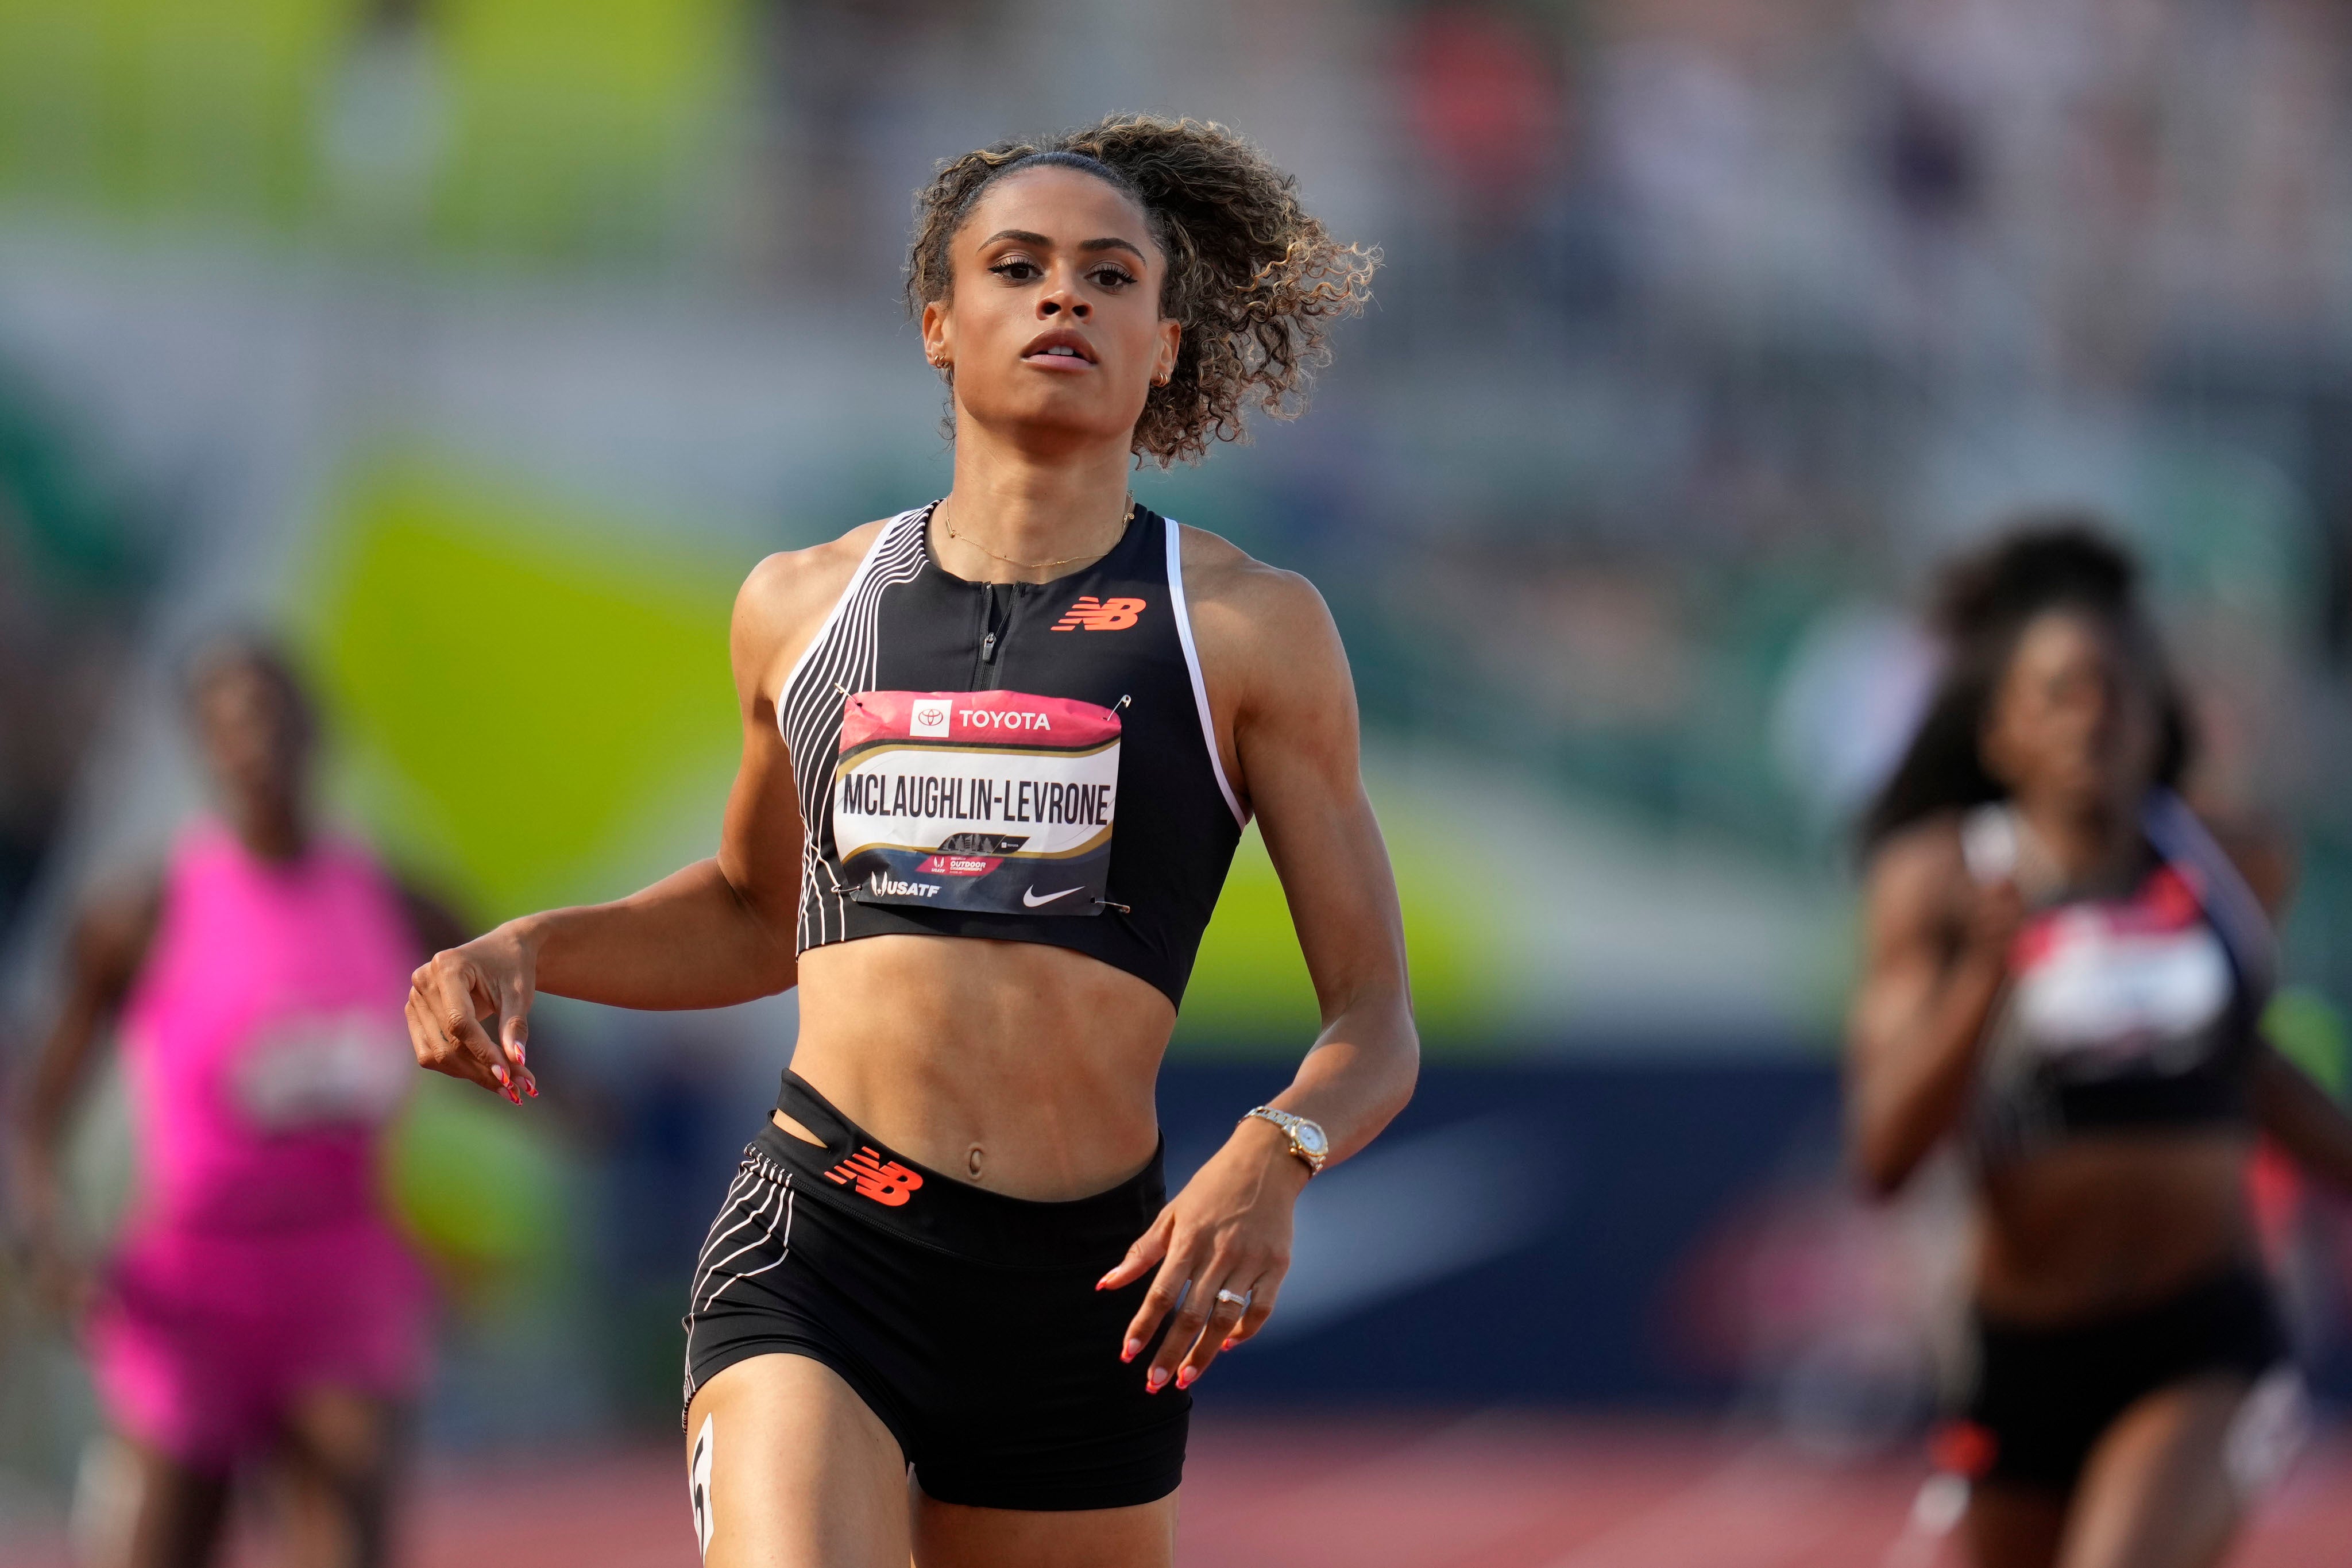 Sydney McLaughlin-Levrone will be in action in Monaco this evening